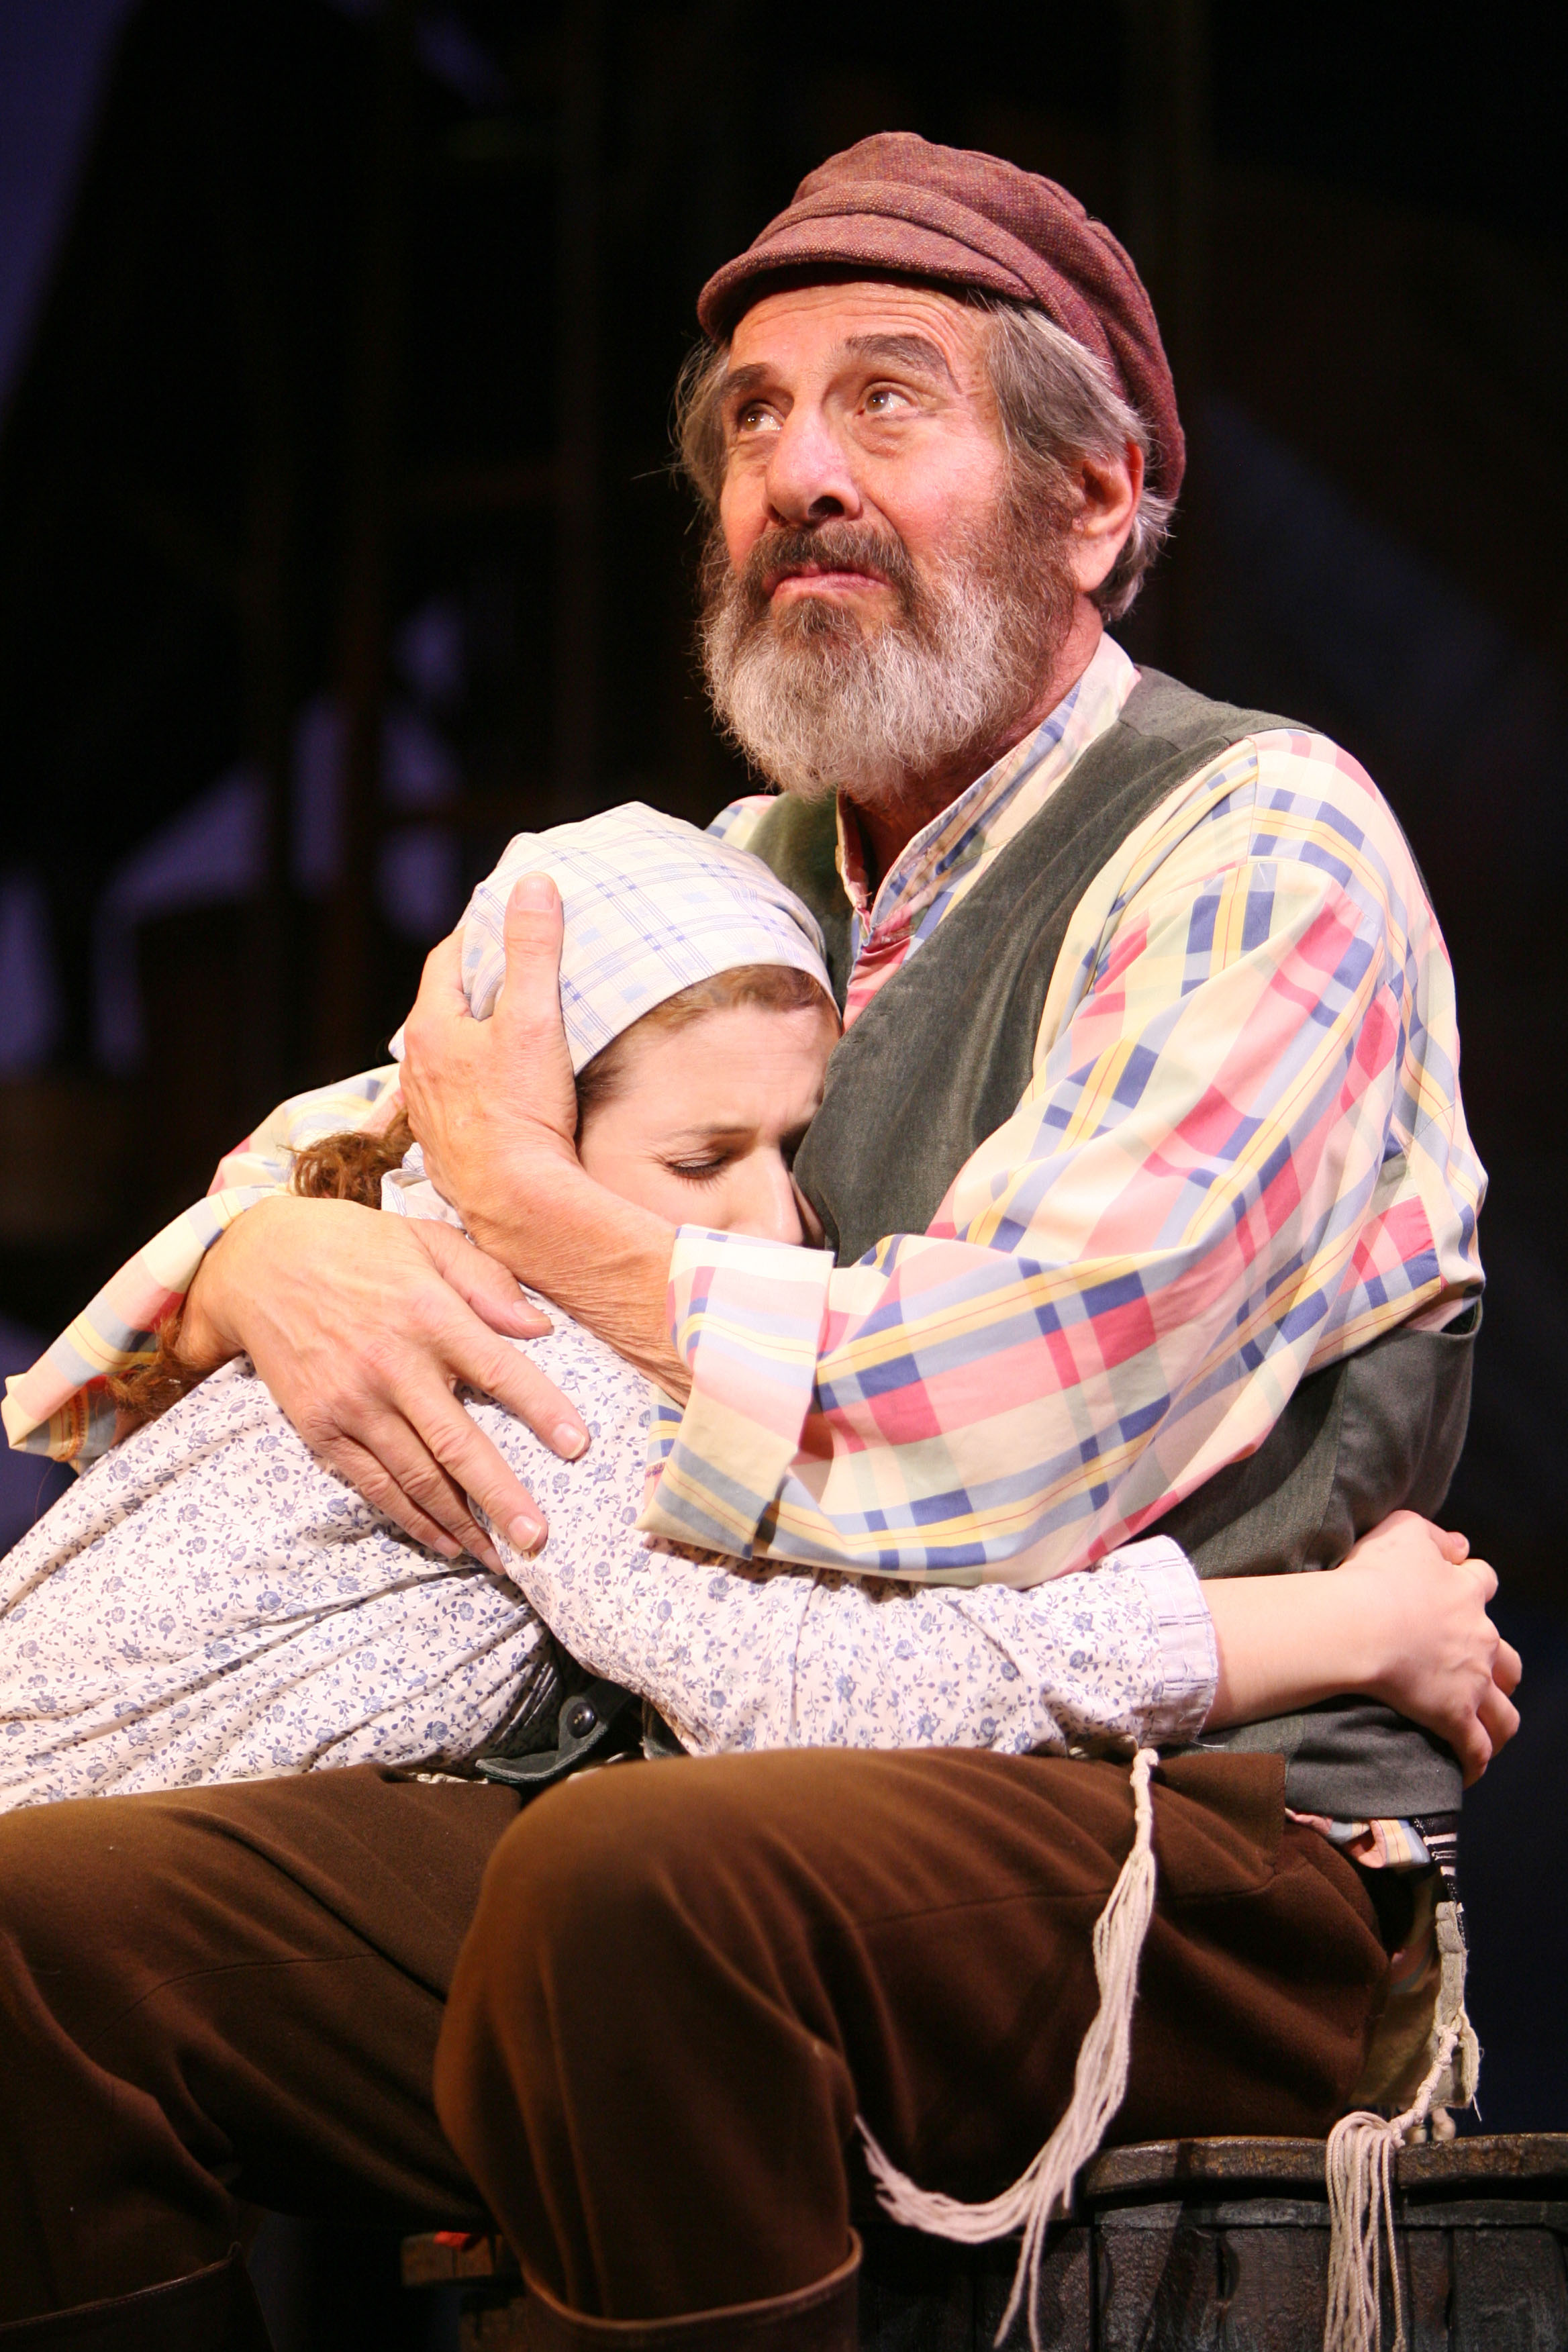 Starring as Tzeitel in 'Fiddler on the Roof' with TOPOL